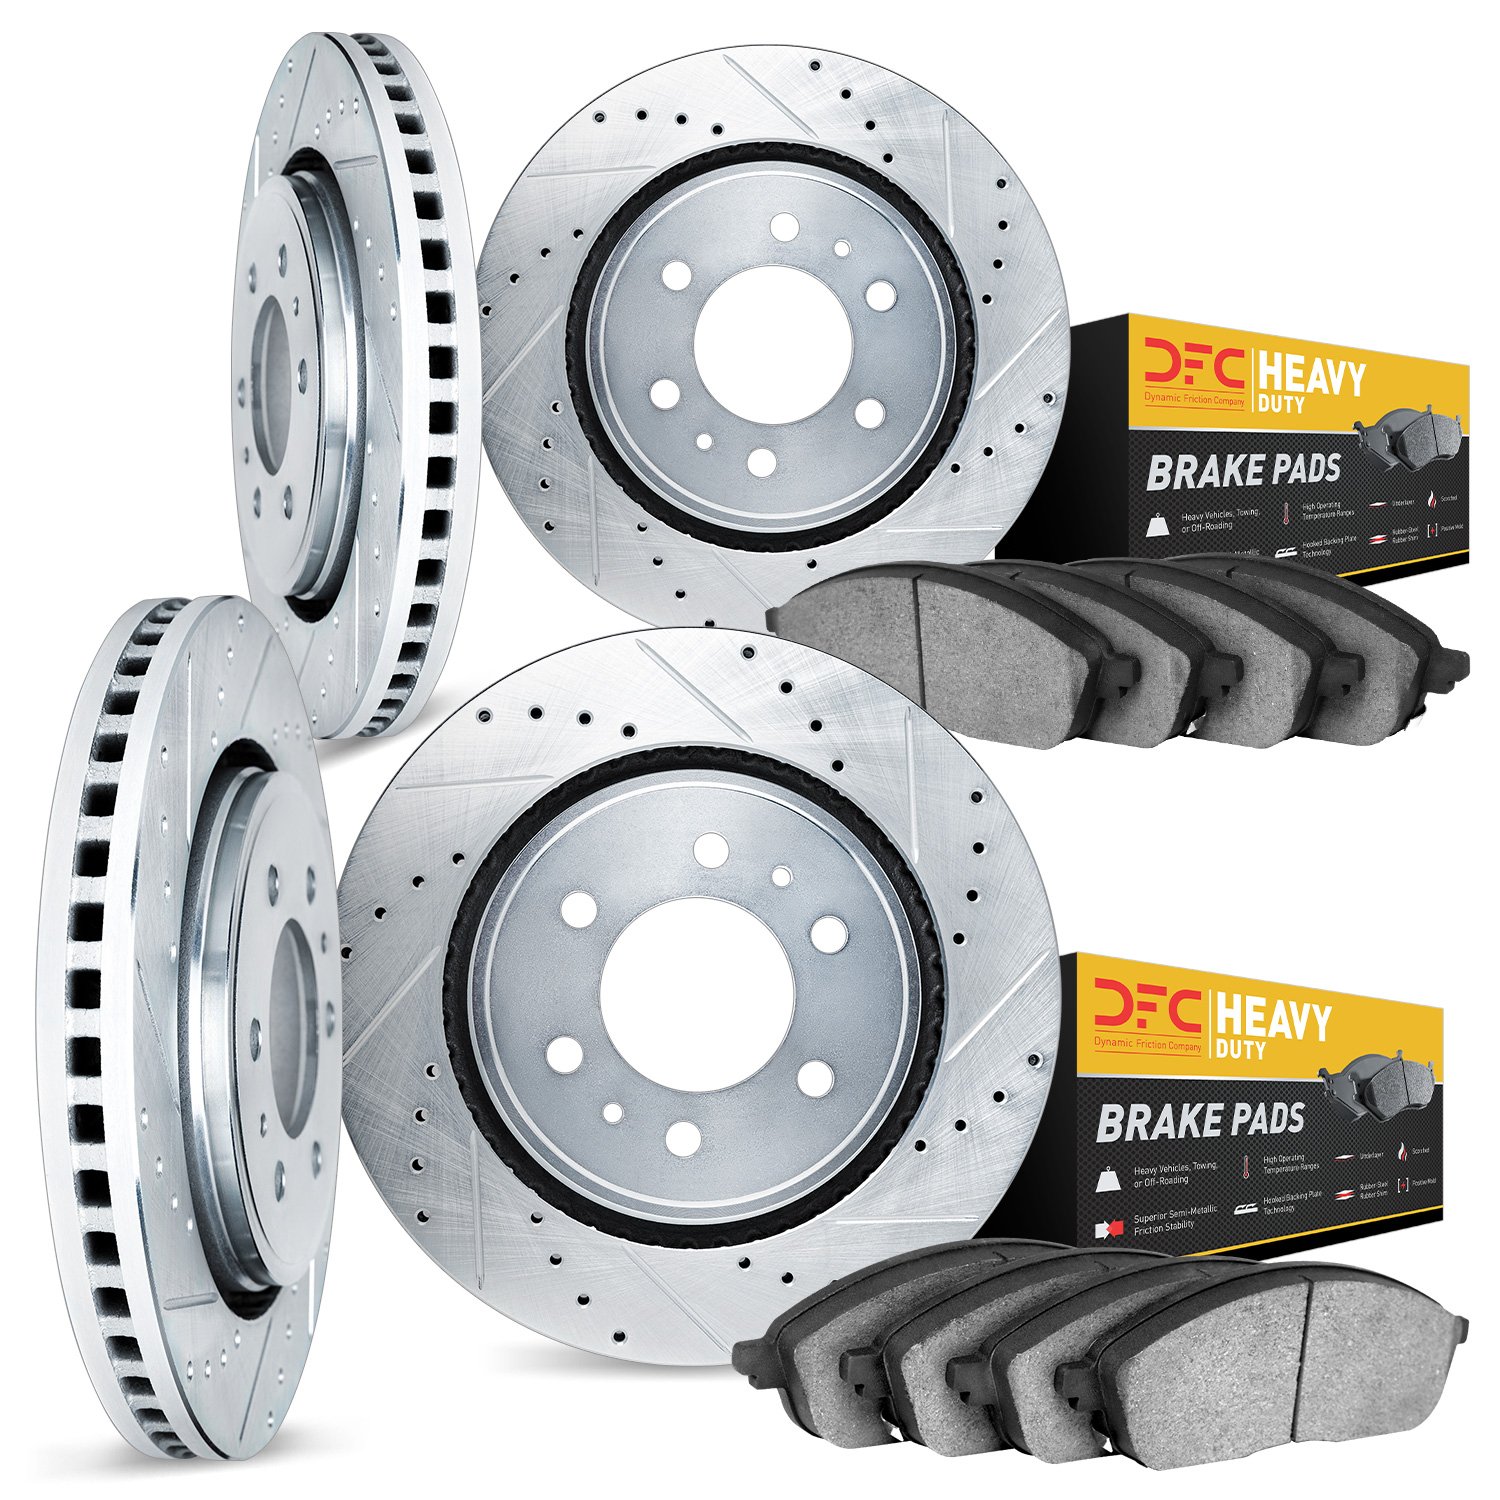 7204-48161 Drilled/Slotted Rotors w/Heavy-Duty Brake Pads Kit [Silver], 2014-2020 GM, Position: Front and Rear